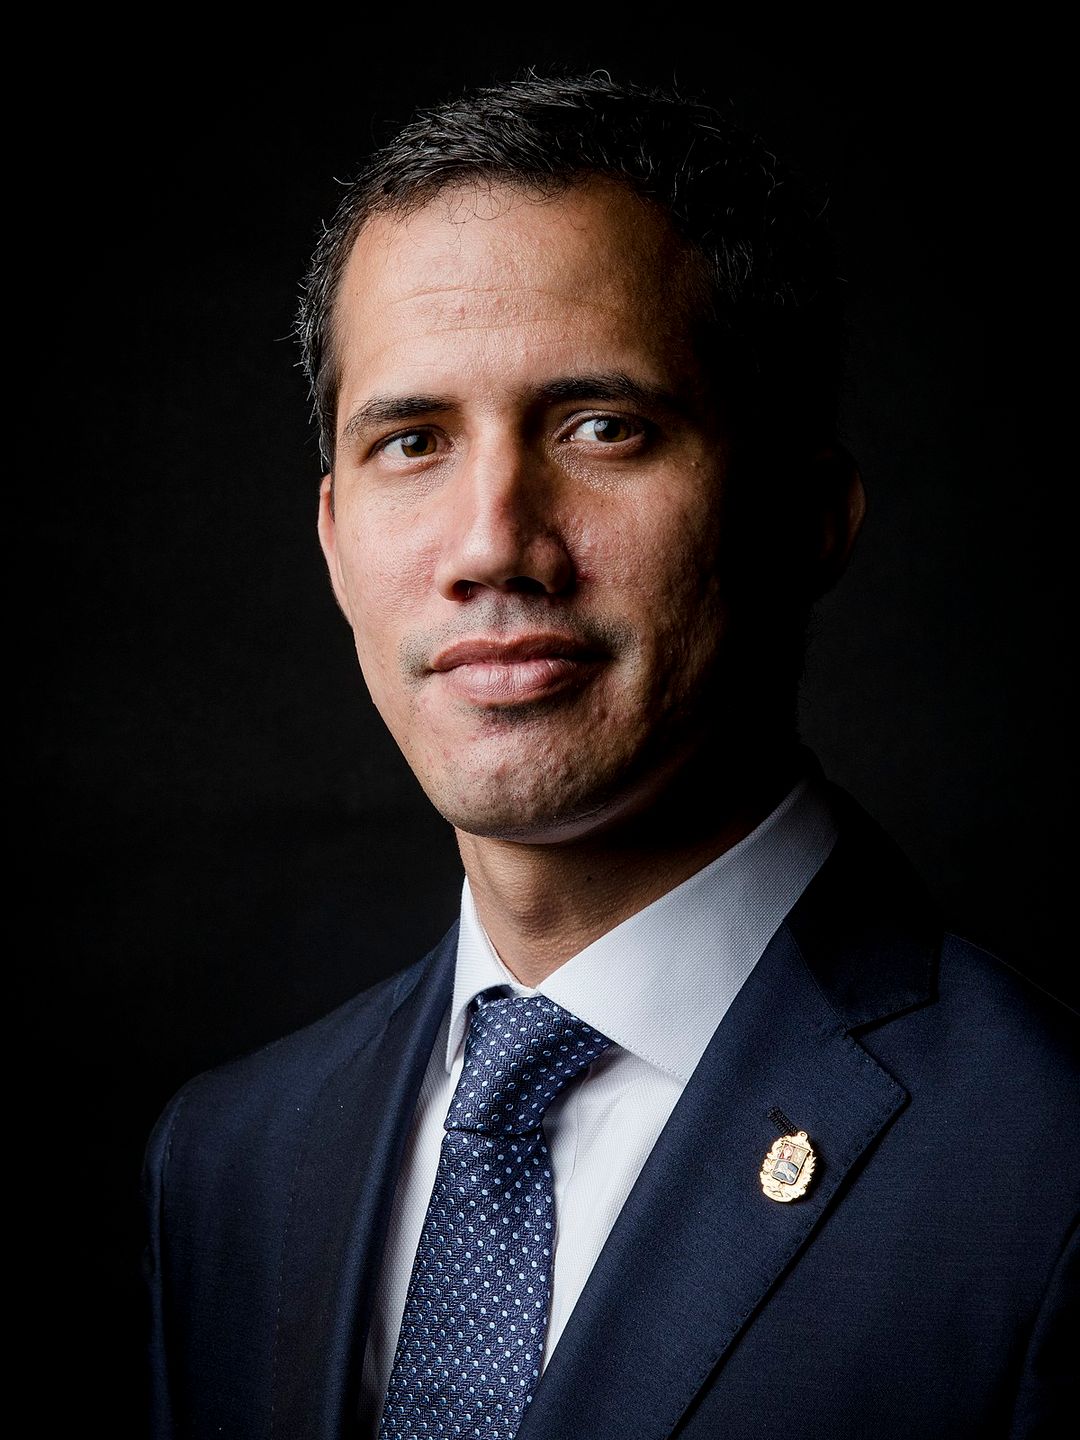 Juan Guaido how did he became famous